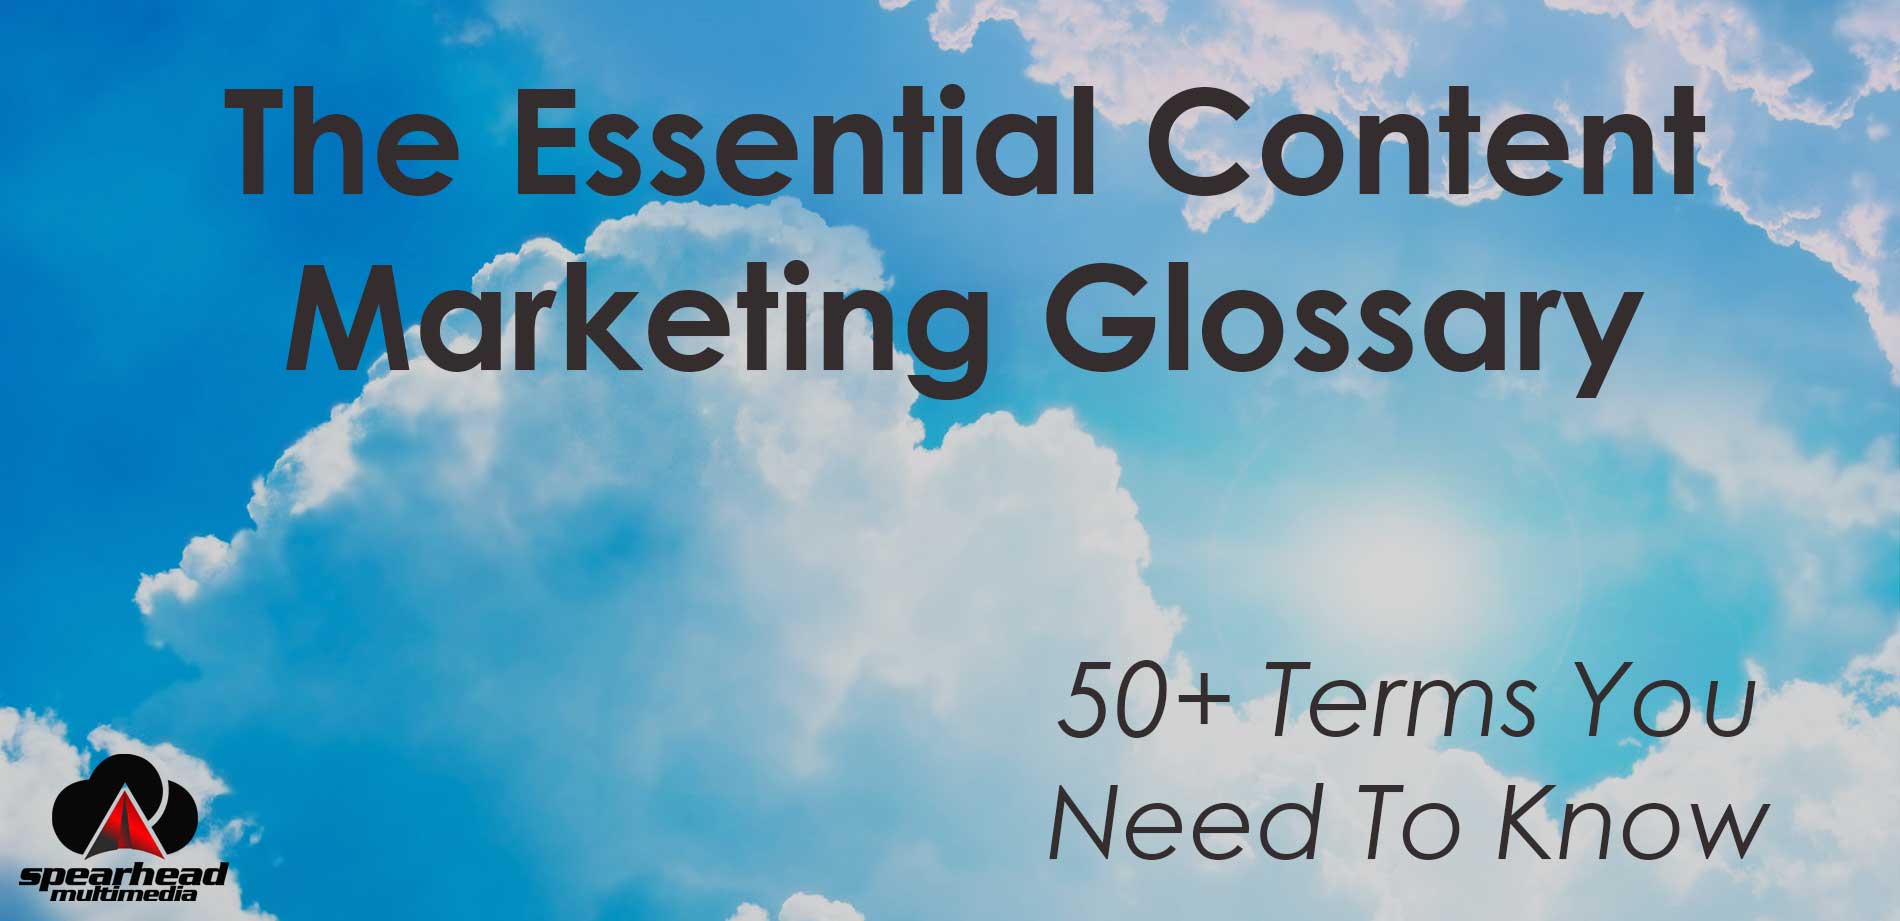 The Essential Content Marketing Glossary